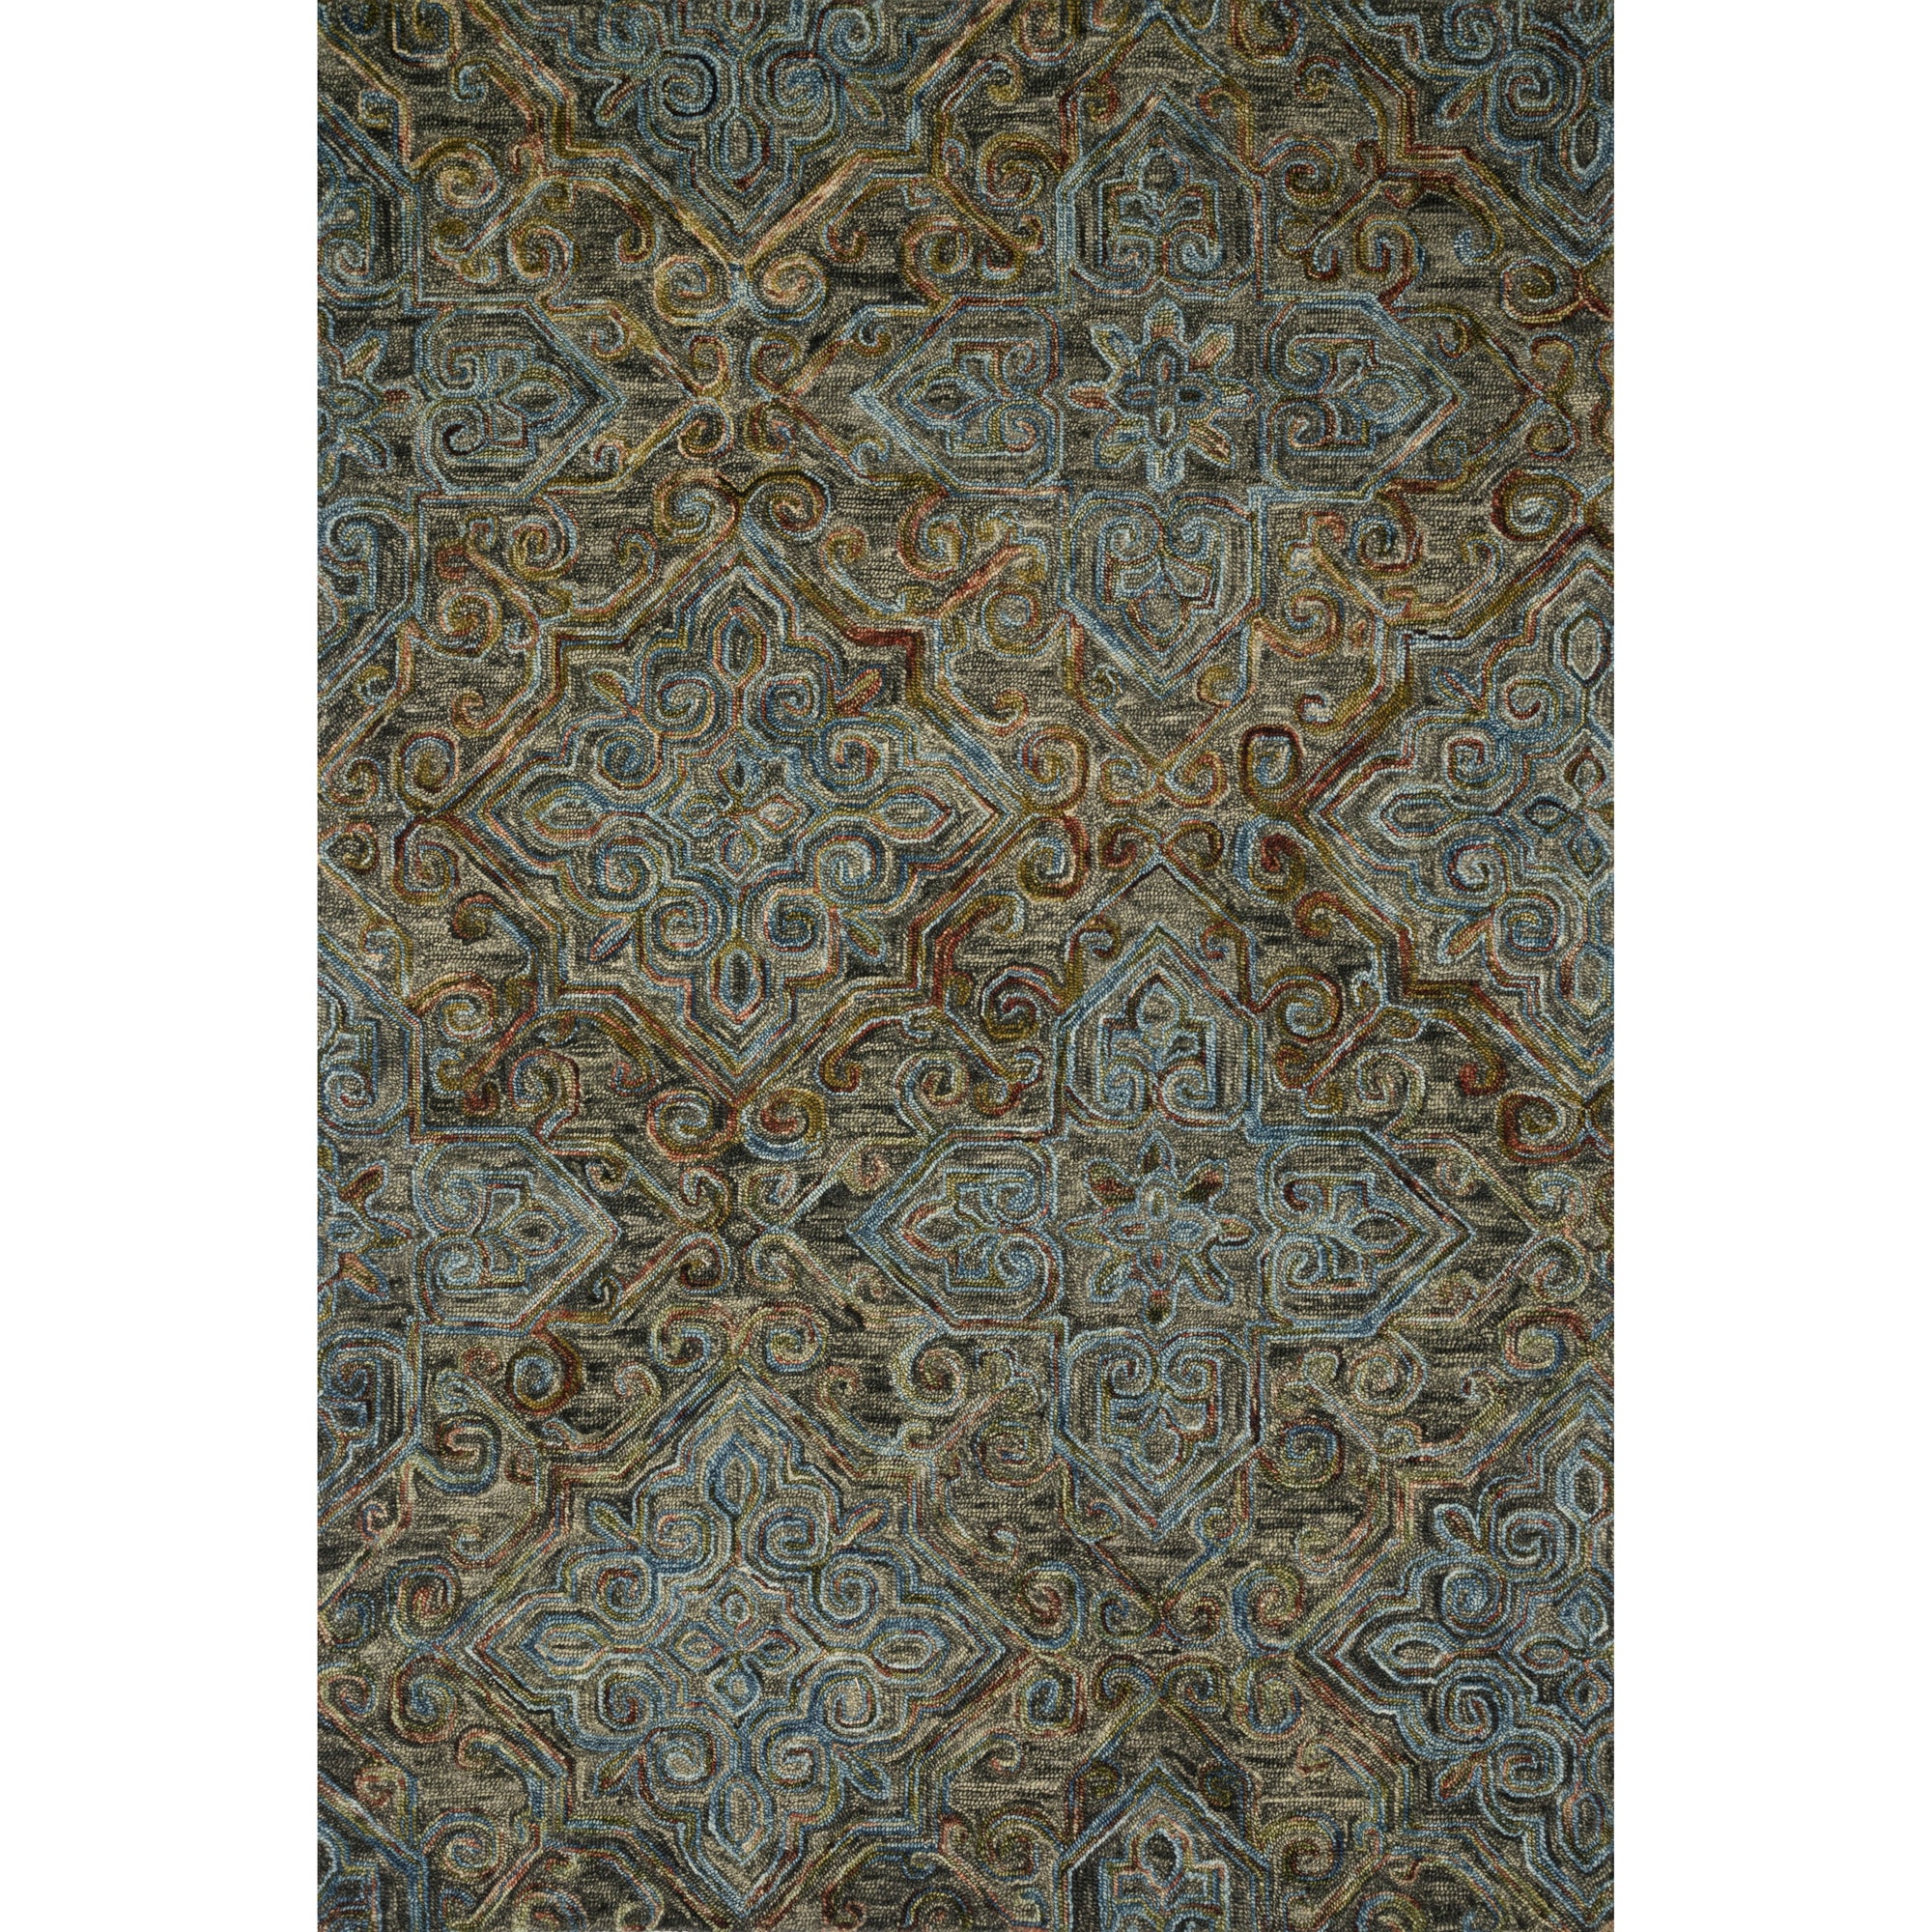 Rugs by Roo Loloi Victoria Charcoal Multi Area Rug in size 18" x 18" Sample